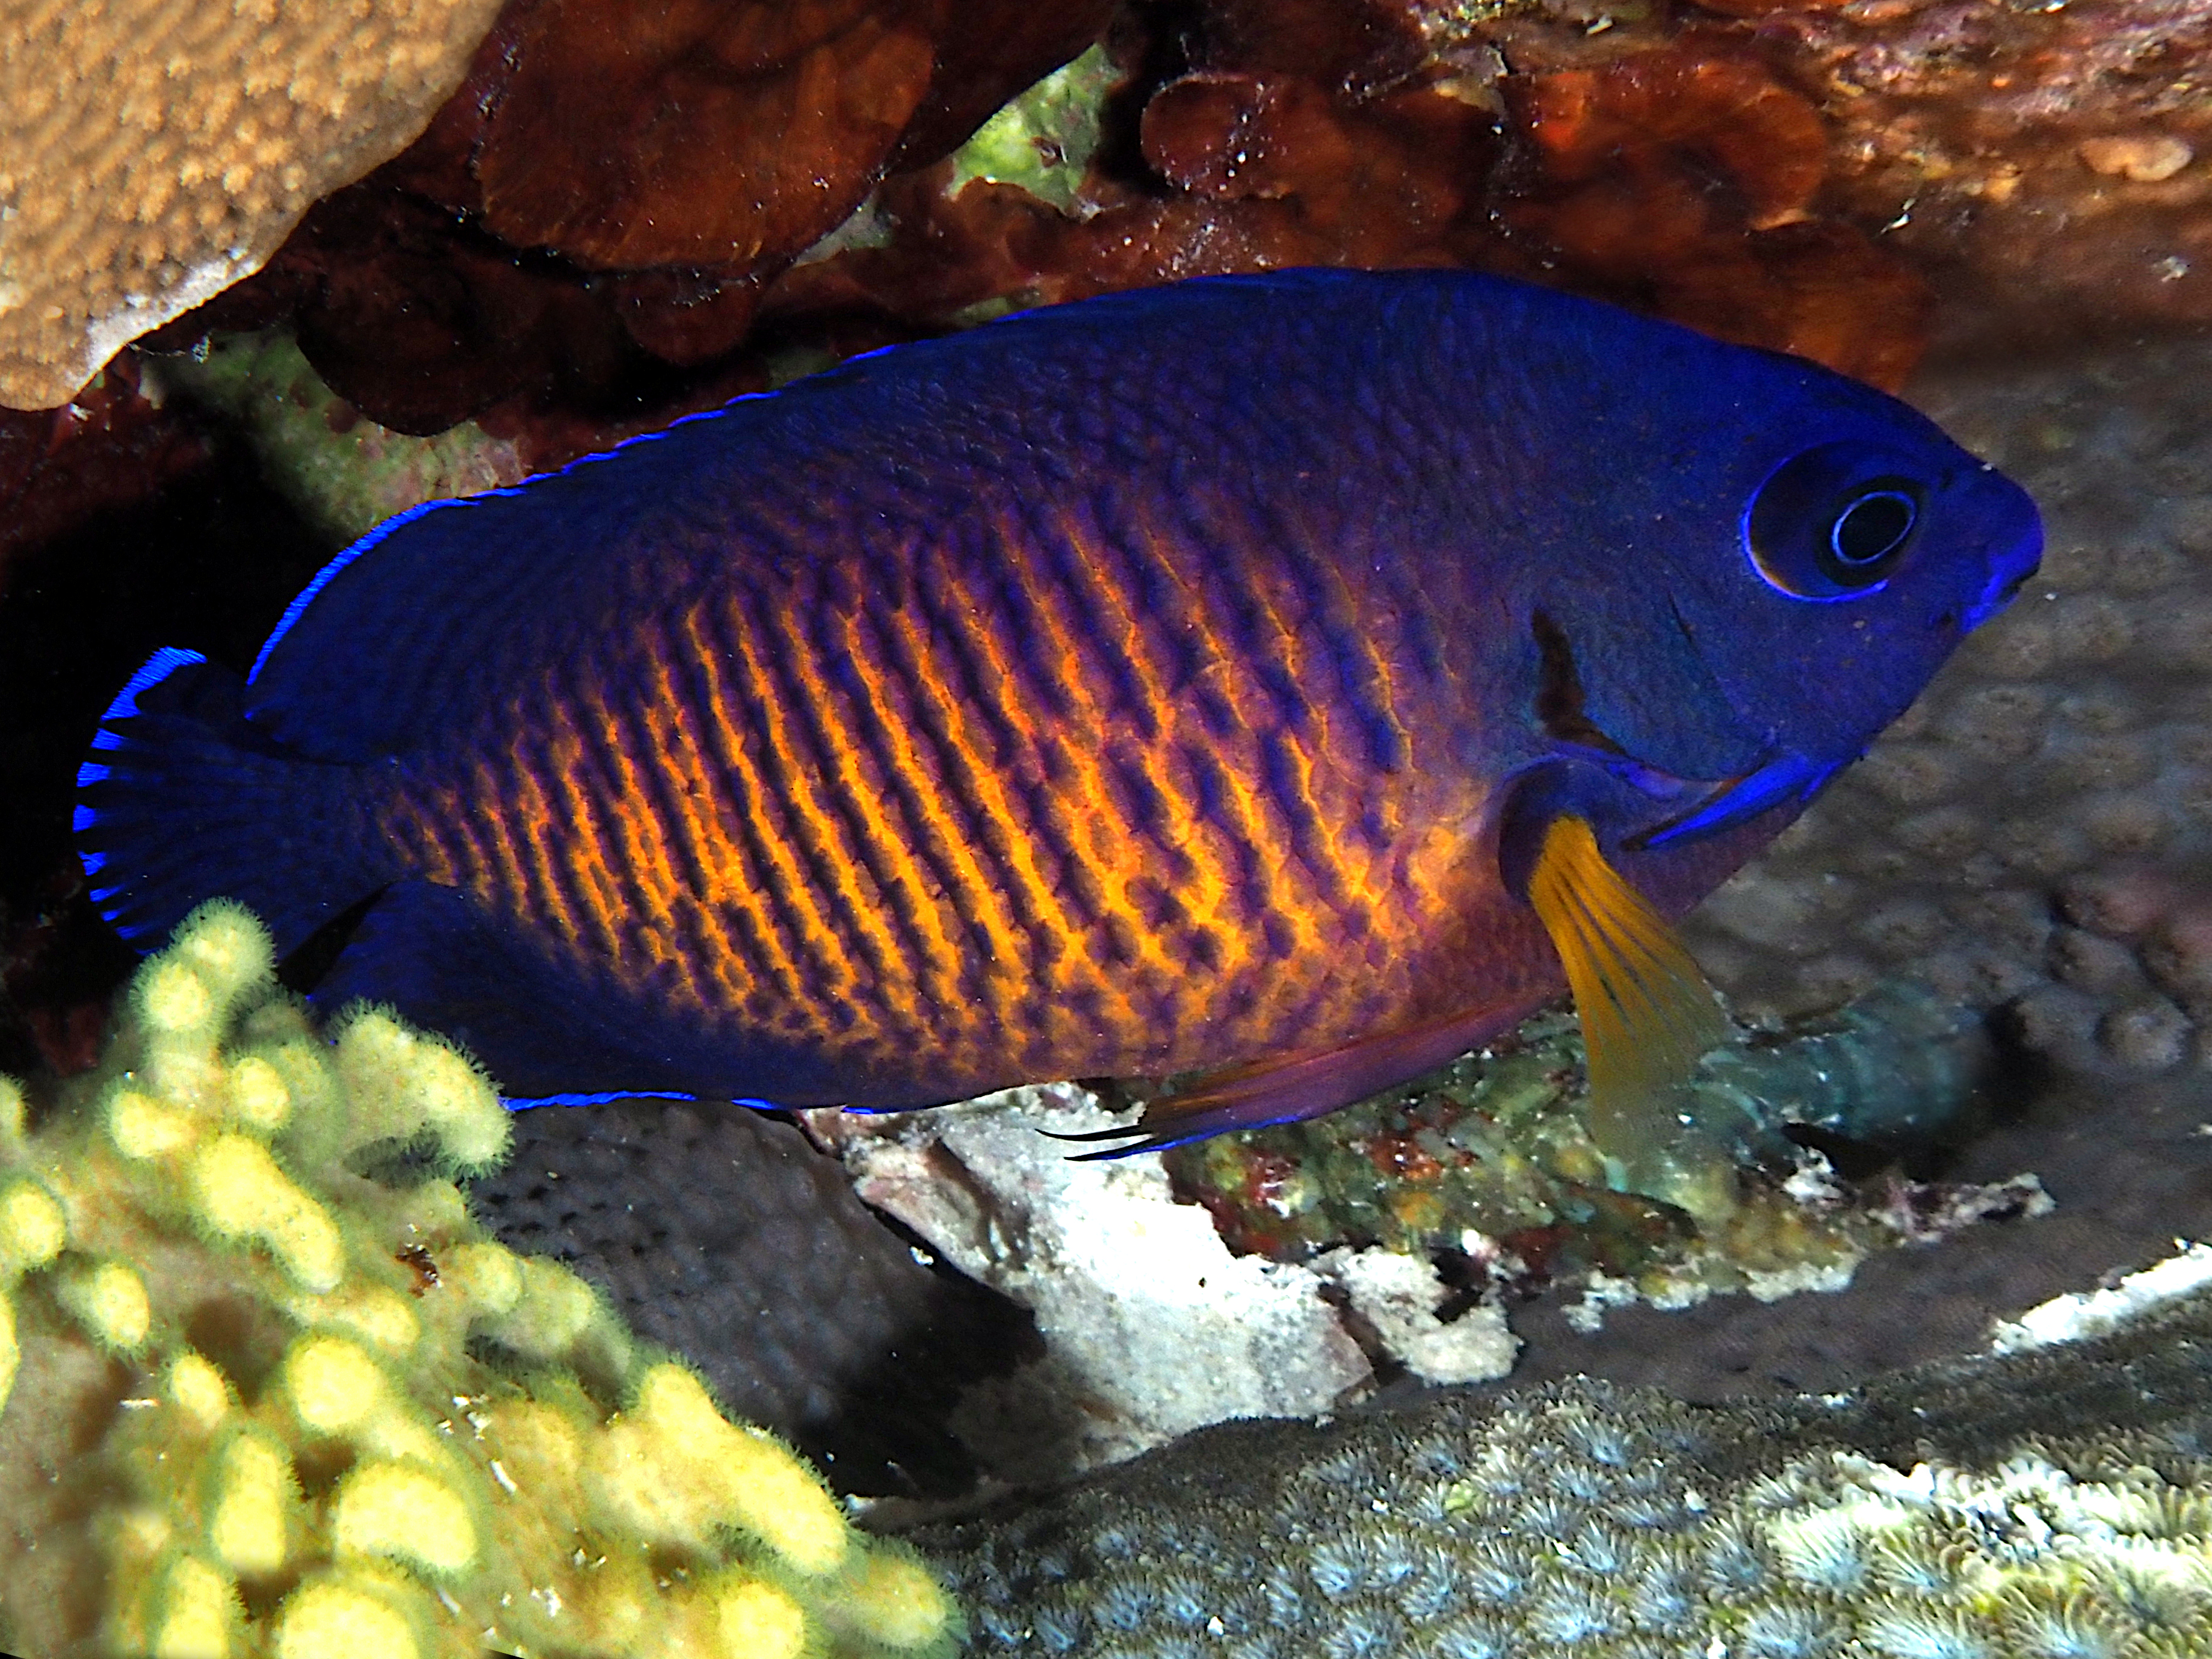 Two-Spined Angelfish - Centropyge bispinosa